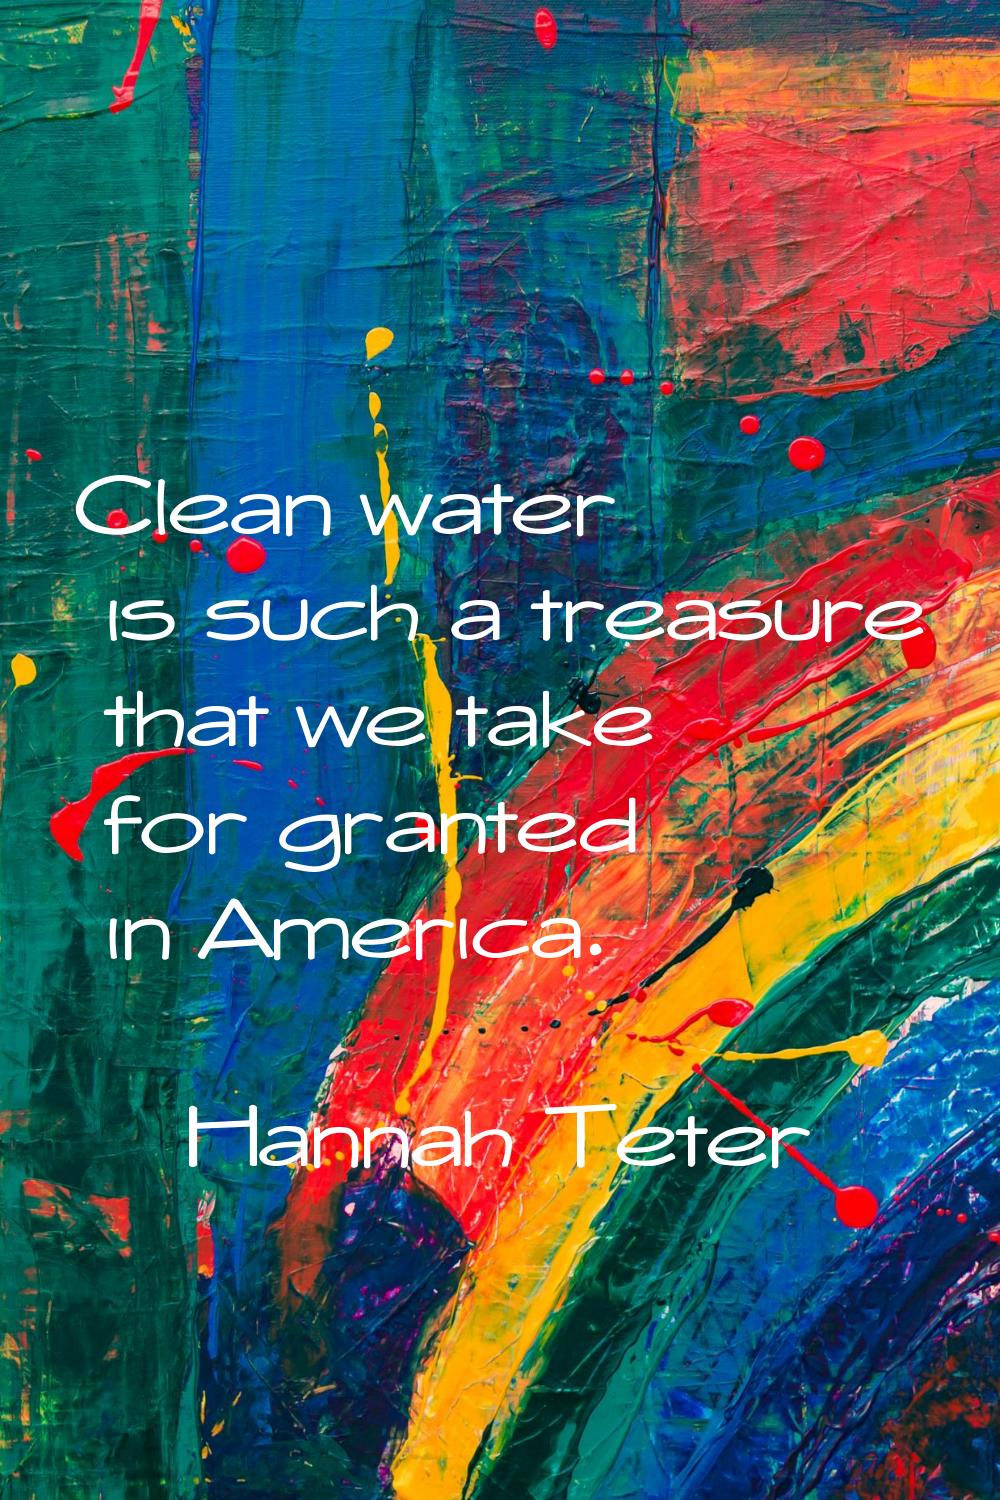 Clean water is such a treasure that we take for granted in America.